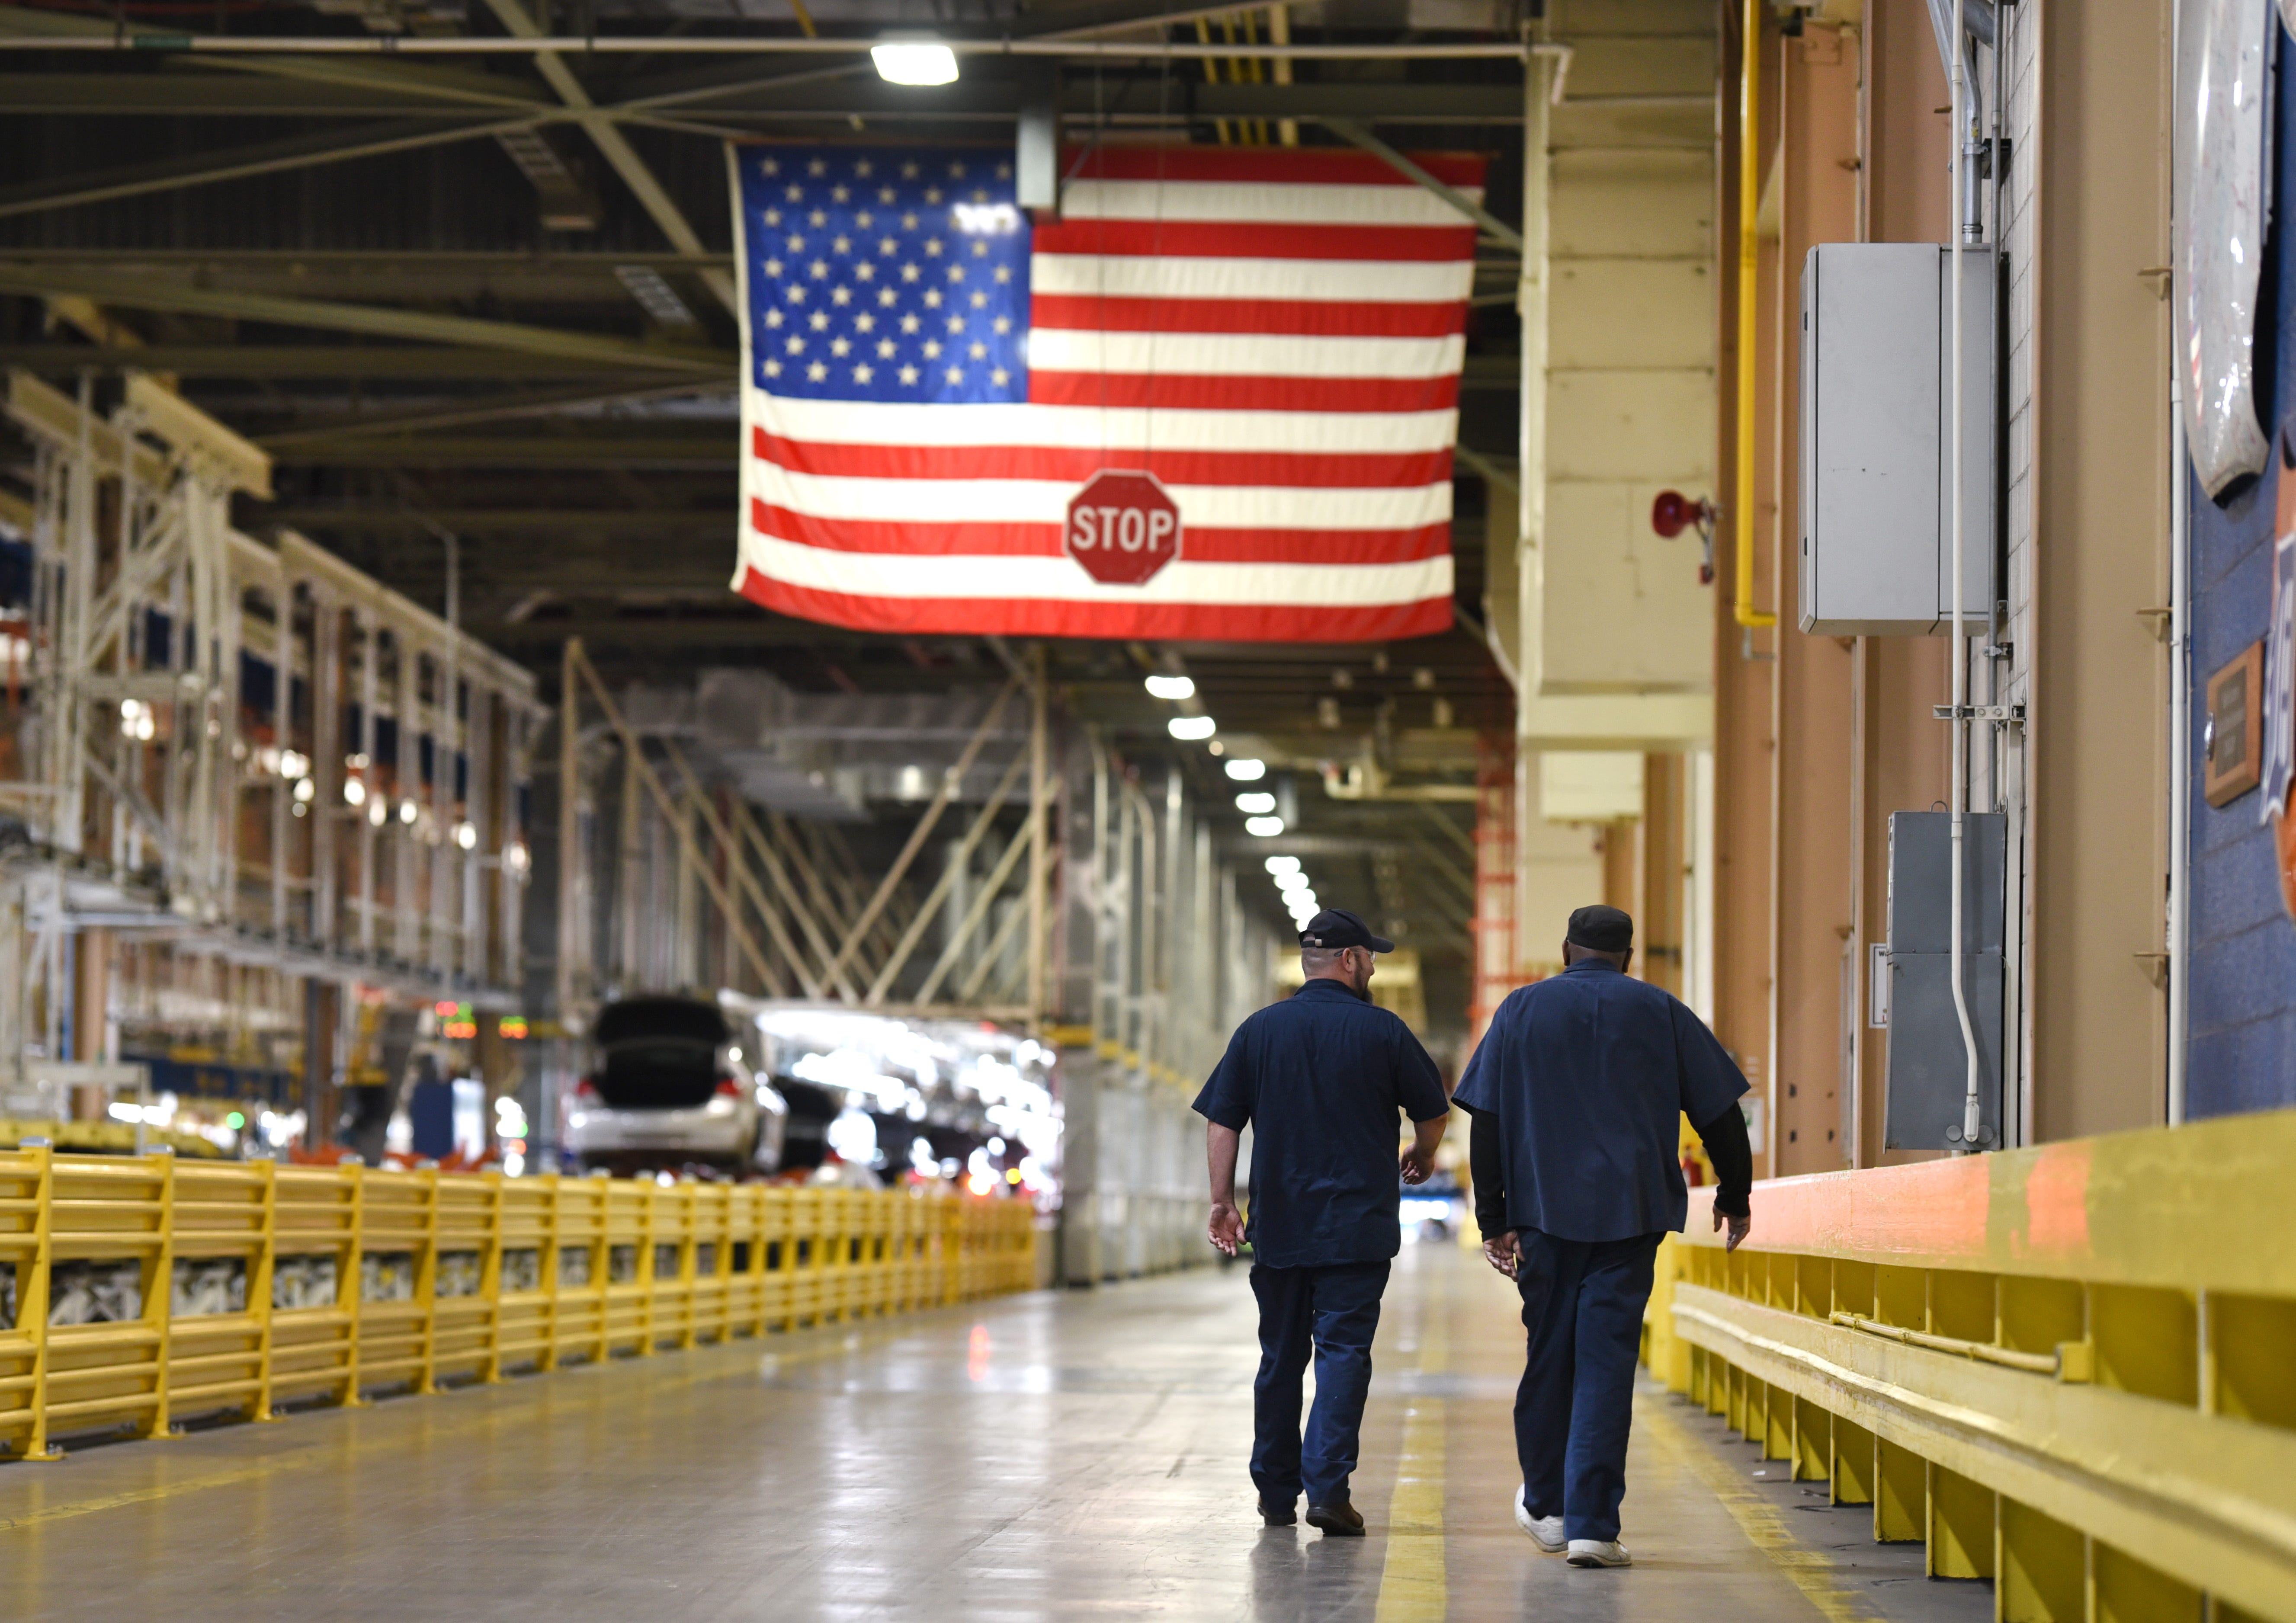 General Motors Detroit-Hamtramck plant employees walk towards the general assembly line as the American flag is seen overhead on Wednesday, February 12, 2020.